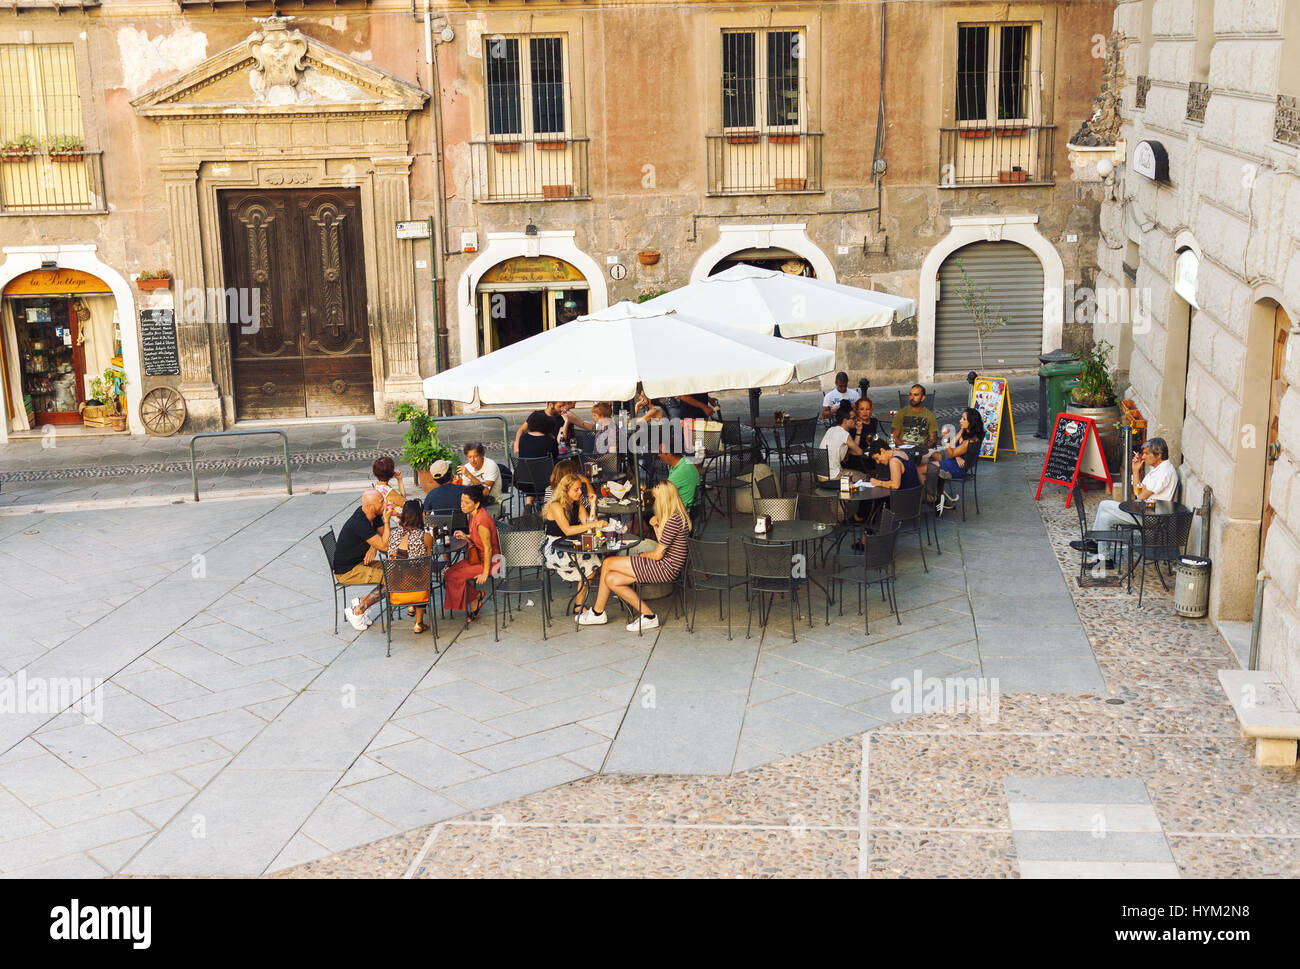 CAGLIARI, ITALY - JULY 07, 2016: People eating at outdoor cafe located in traditional small city square in Cagliari, Italy Stock Photo